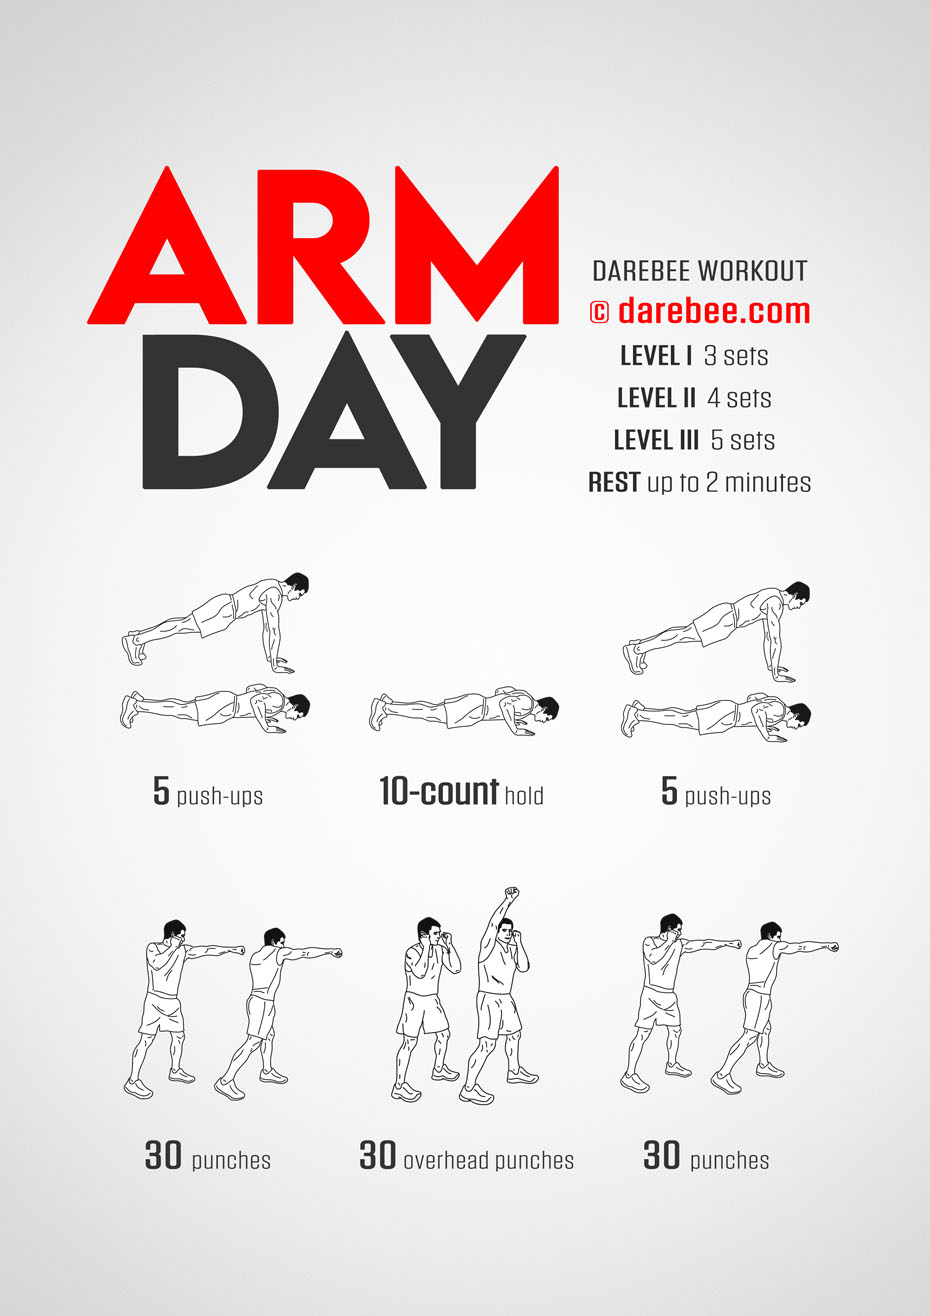 https://darebee.com/images/workouts/arm-day-workout.jpg